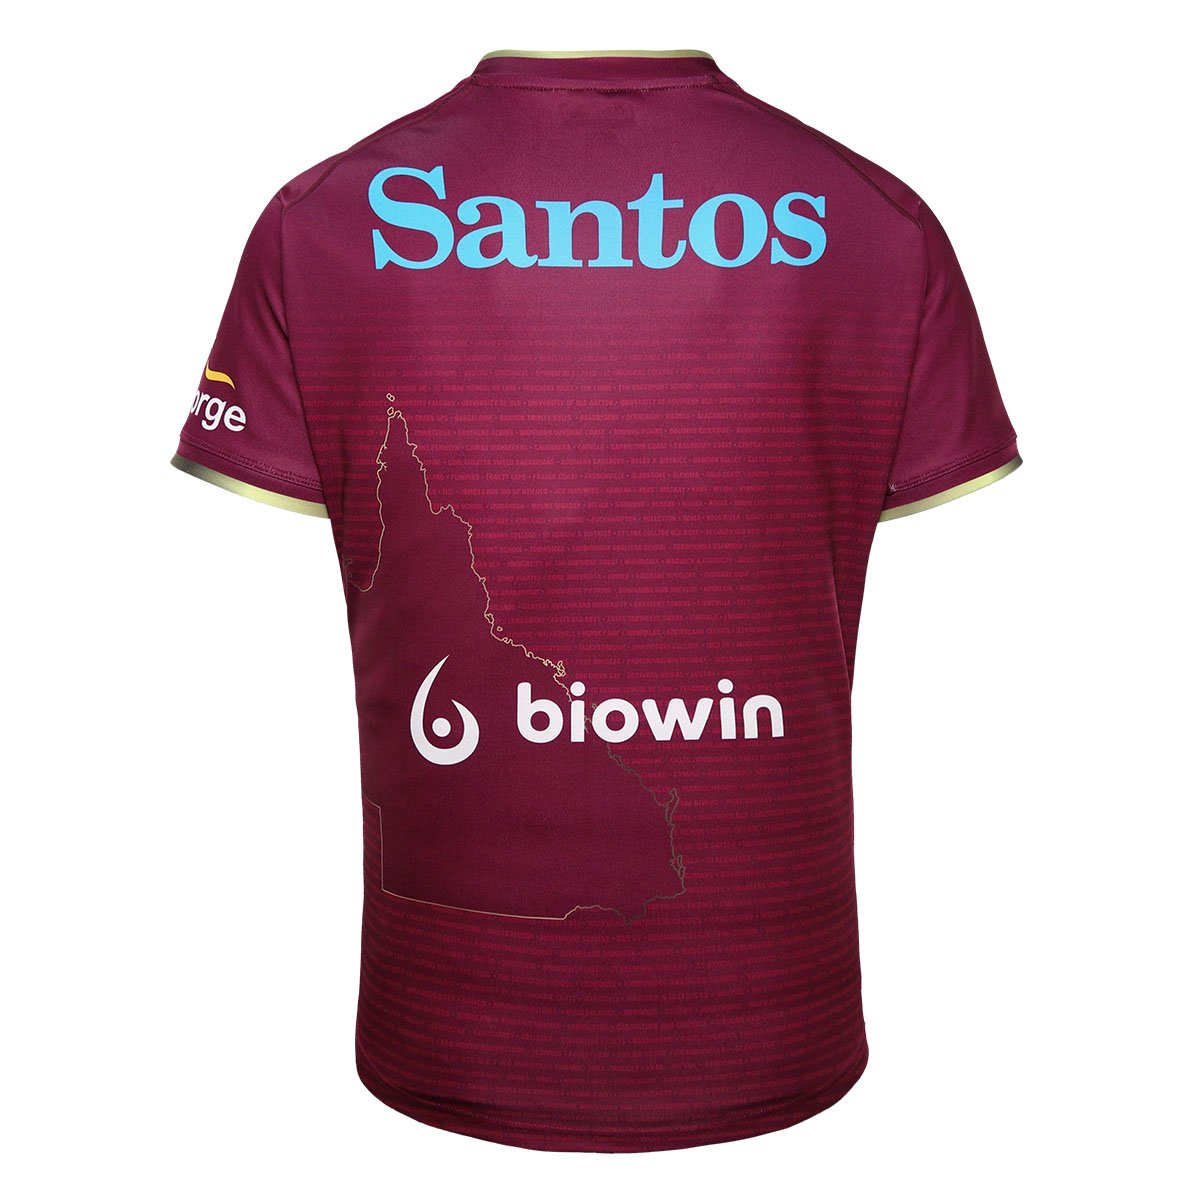 QLD Reds Home Jersey 22 - The Rugby Shop Darwin